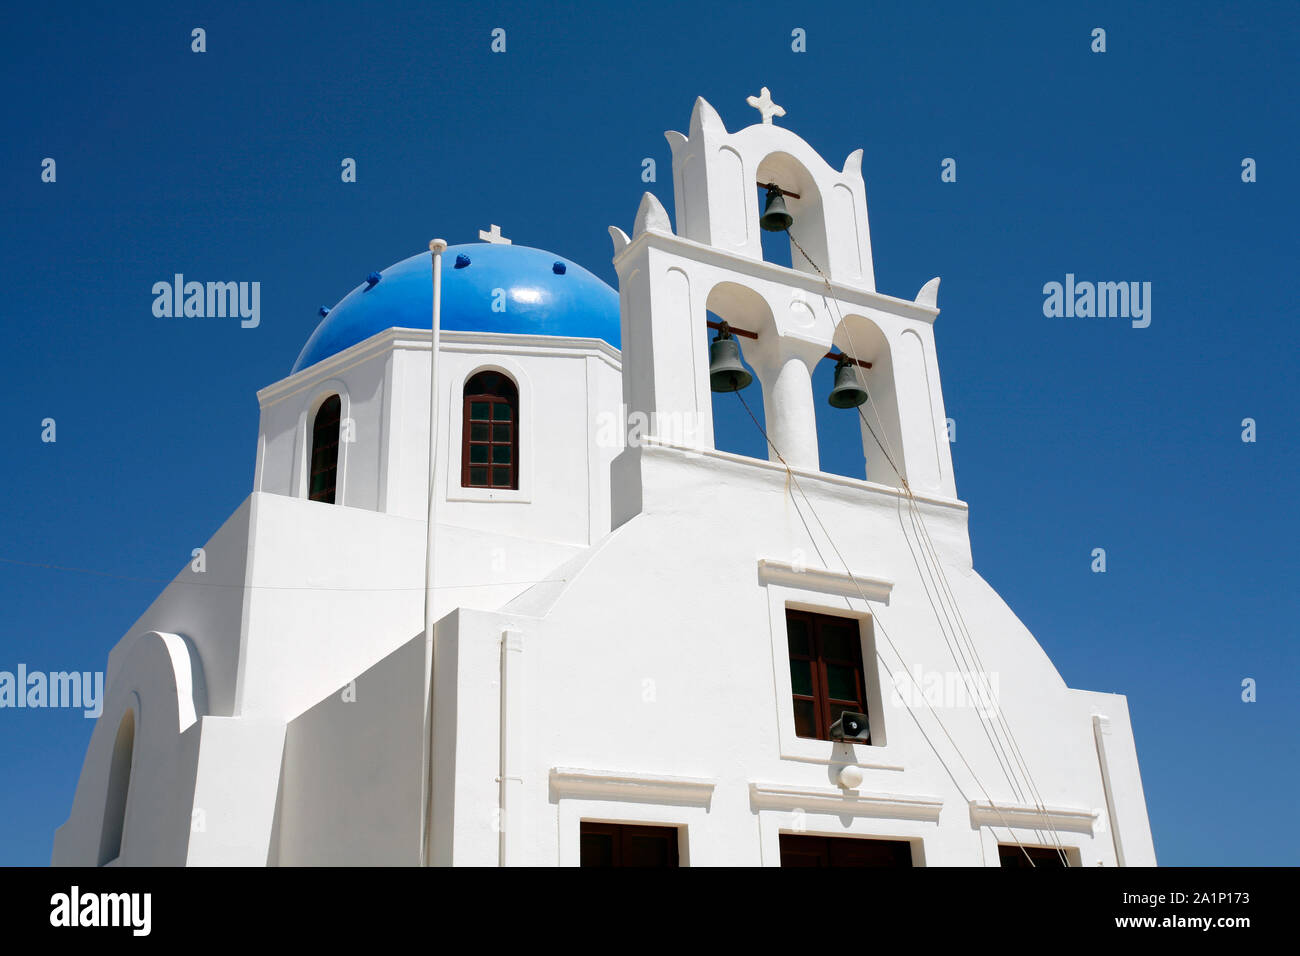 A traditional blue-domed church on the Greek Cycladic island of Santorini Stock Photo